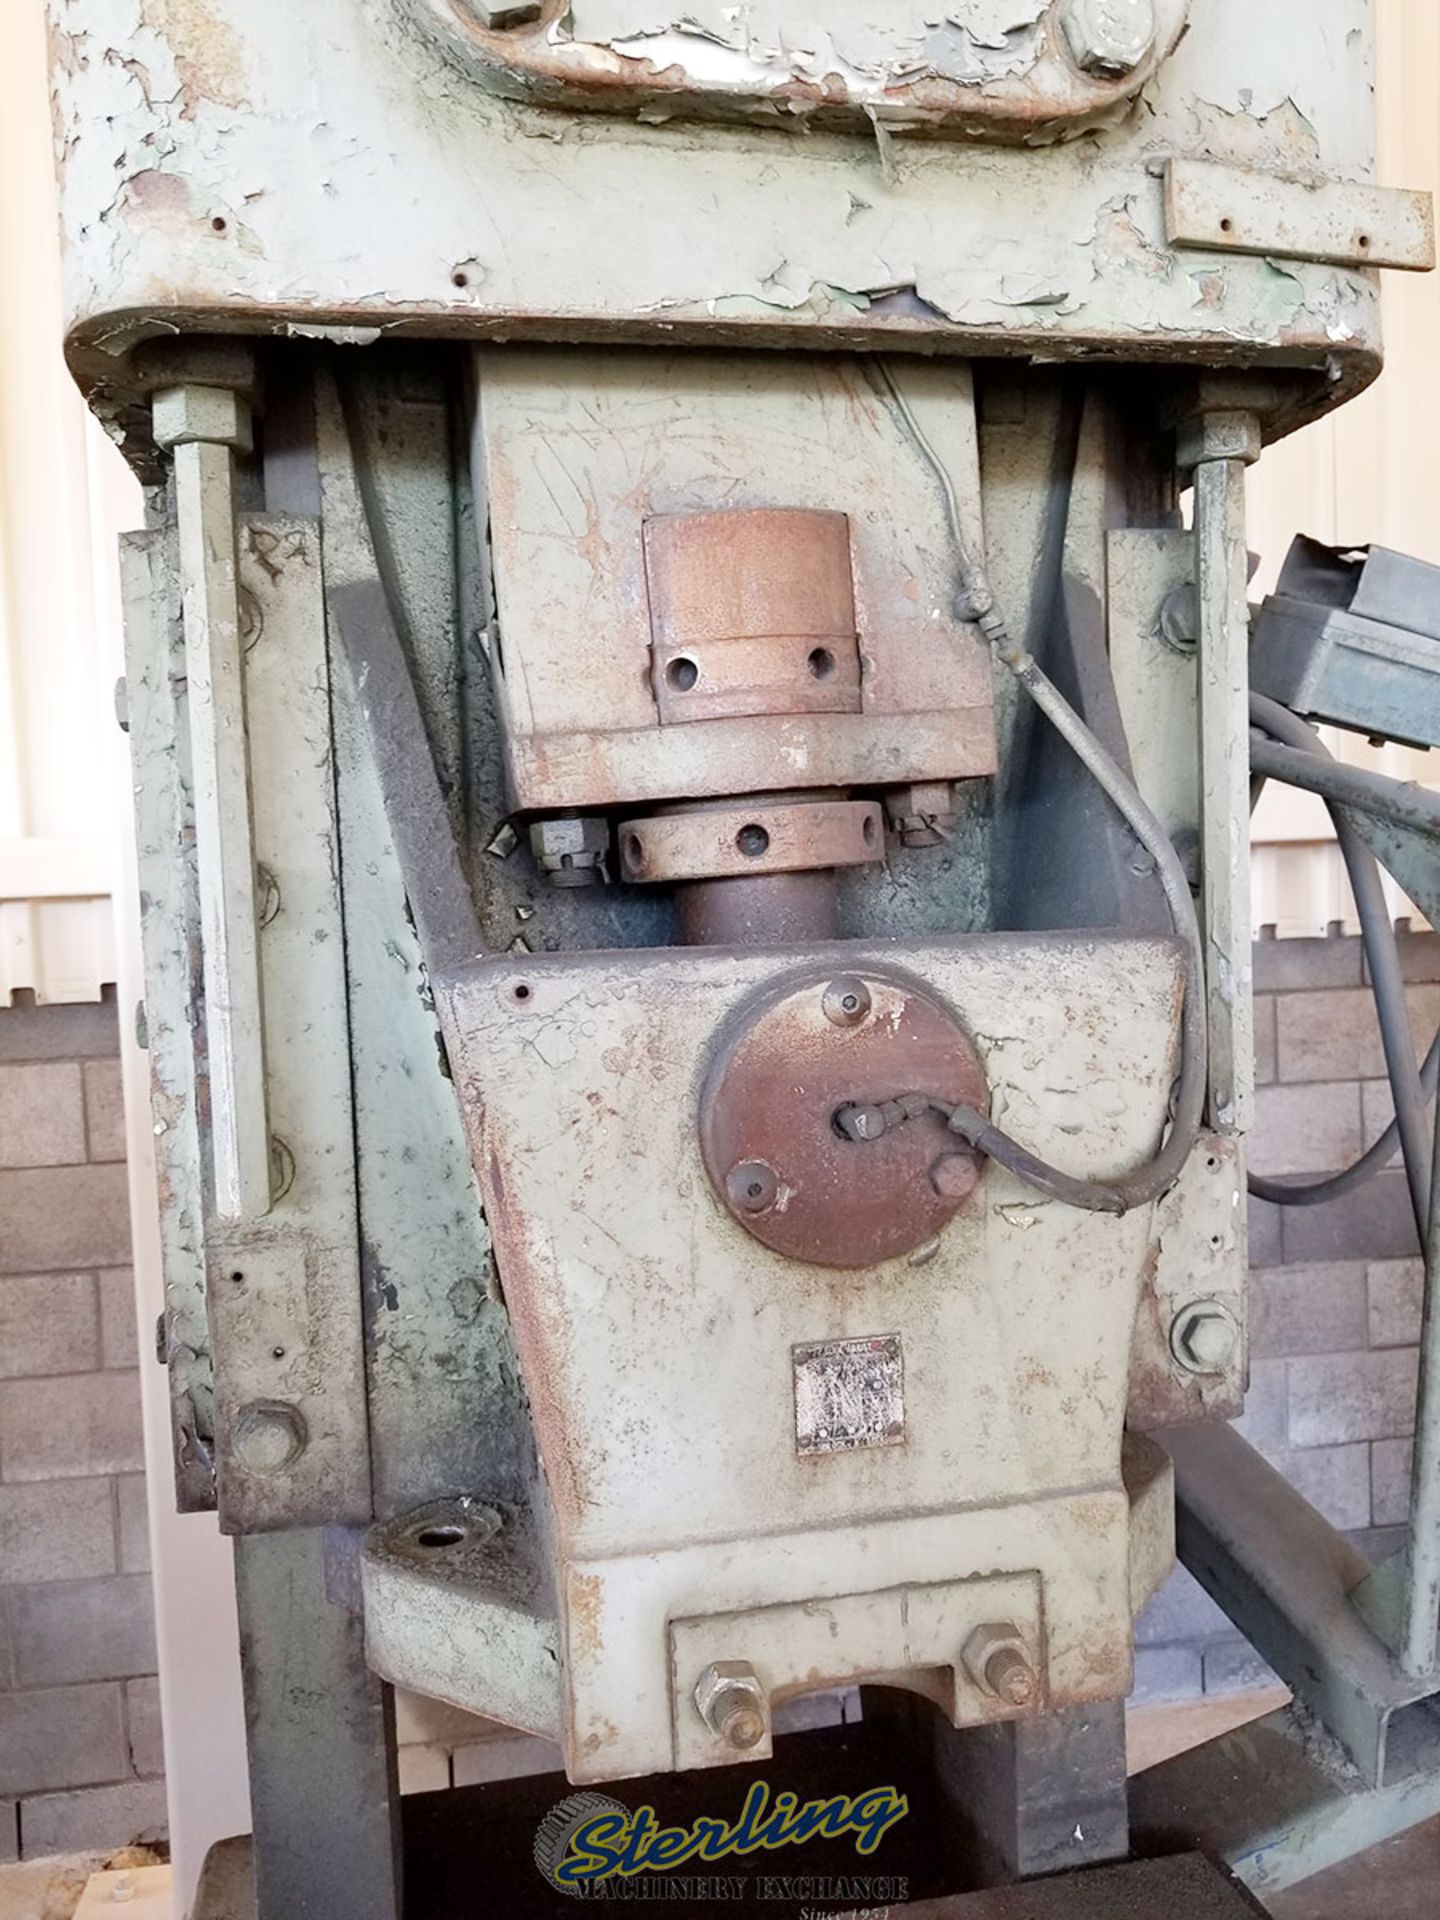 60 Ton x 6" Used USI, Clearing OBI Punch Press, Mdl. - Image 2 of 11